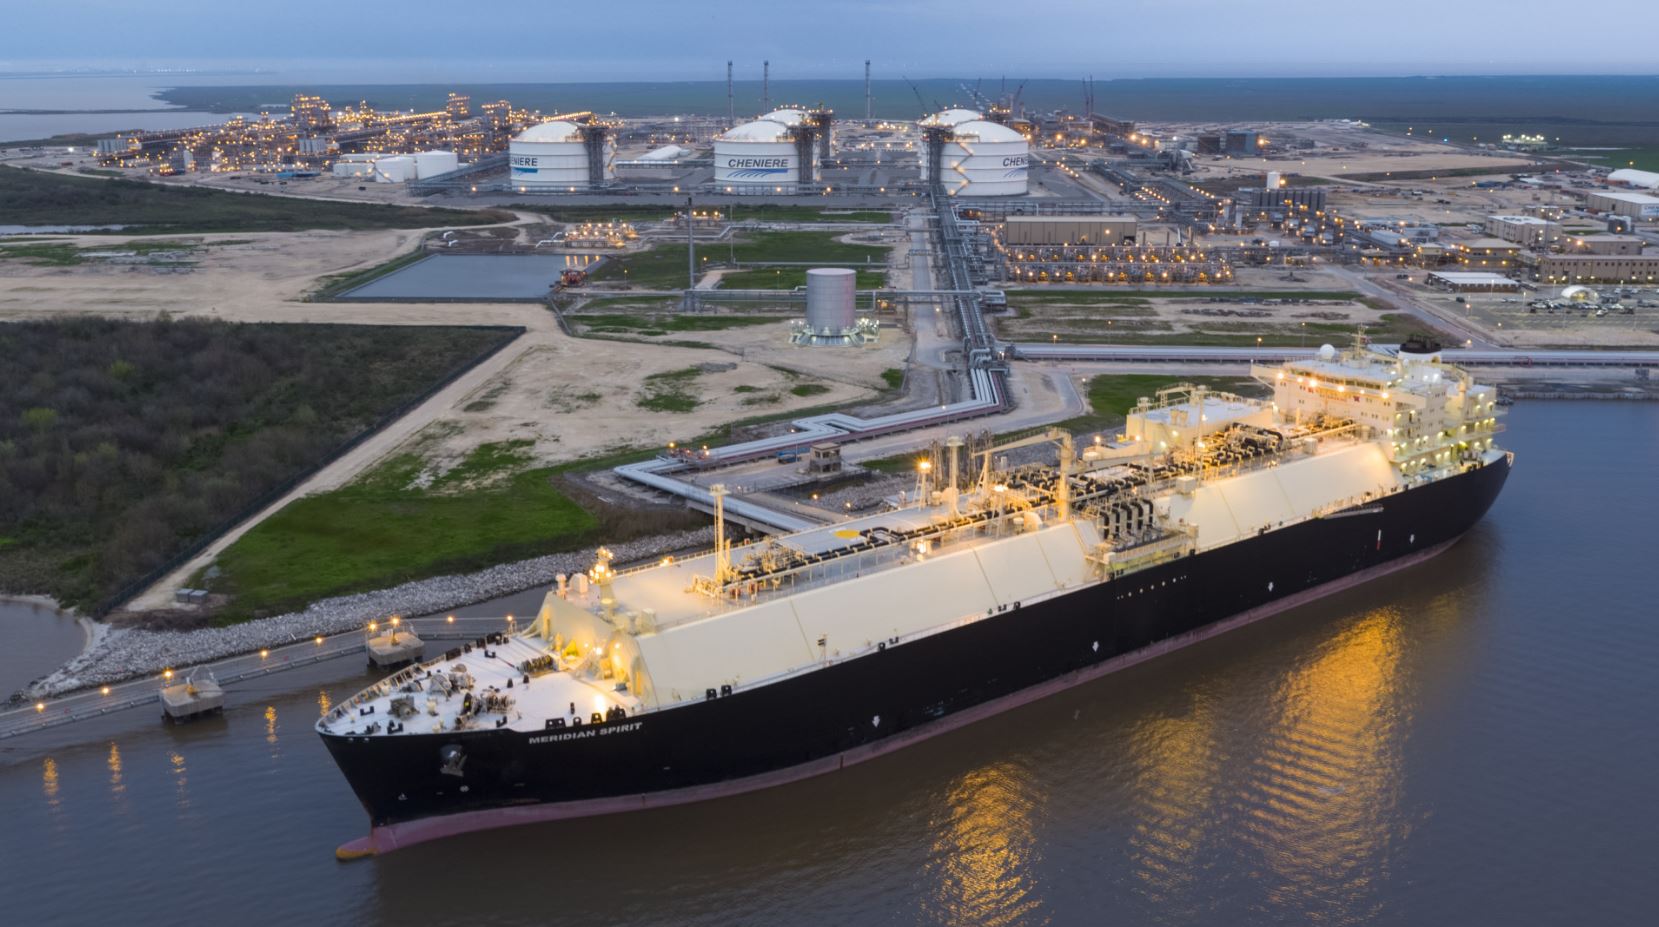 Eia says US exports more LNG than pipeline gas